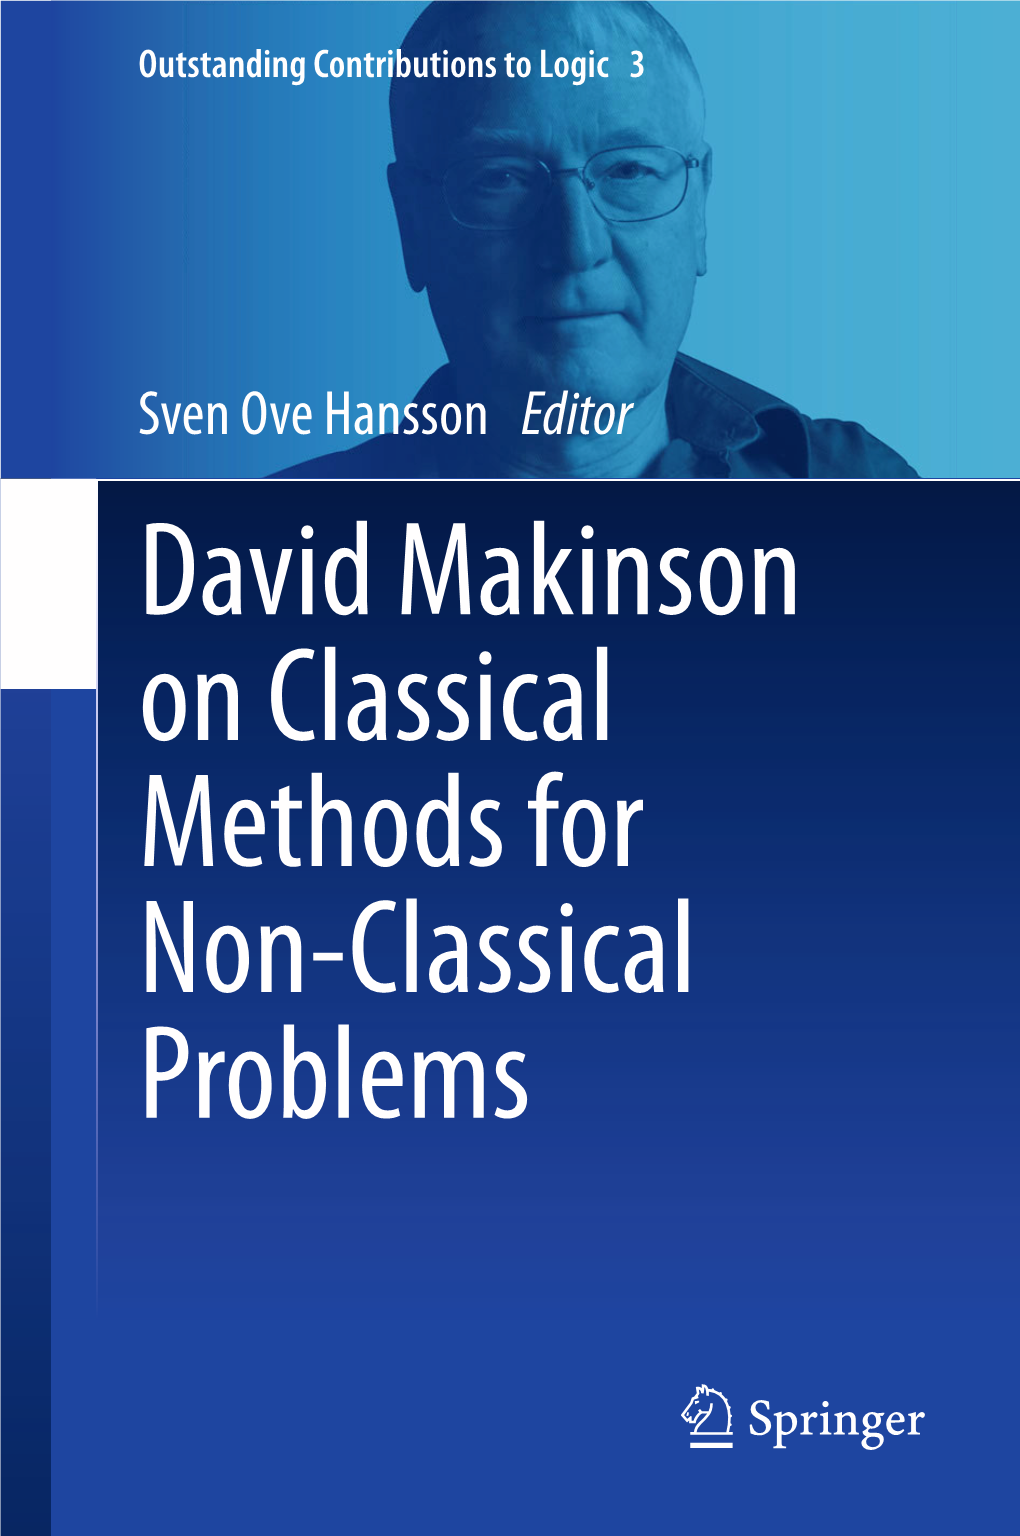 David Makinson on Classical Methods for Non-Classical Problems Outstanding Contributions to Logic